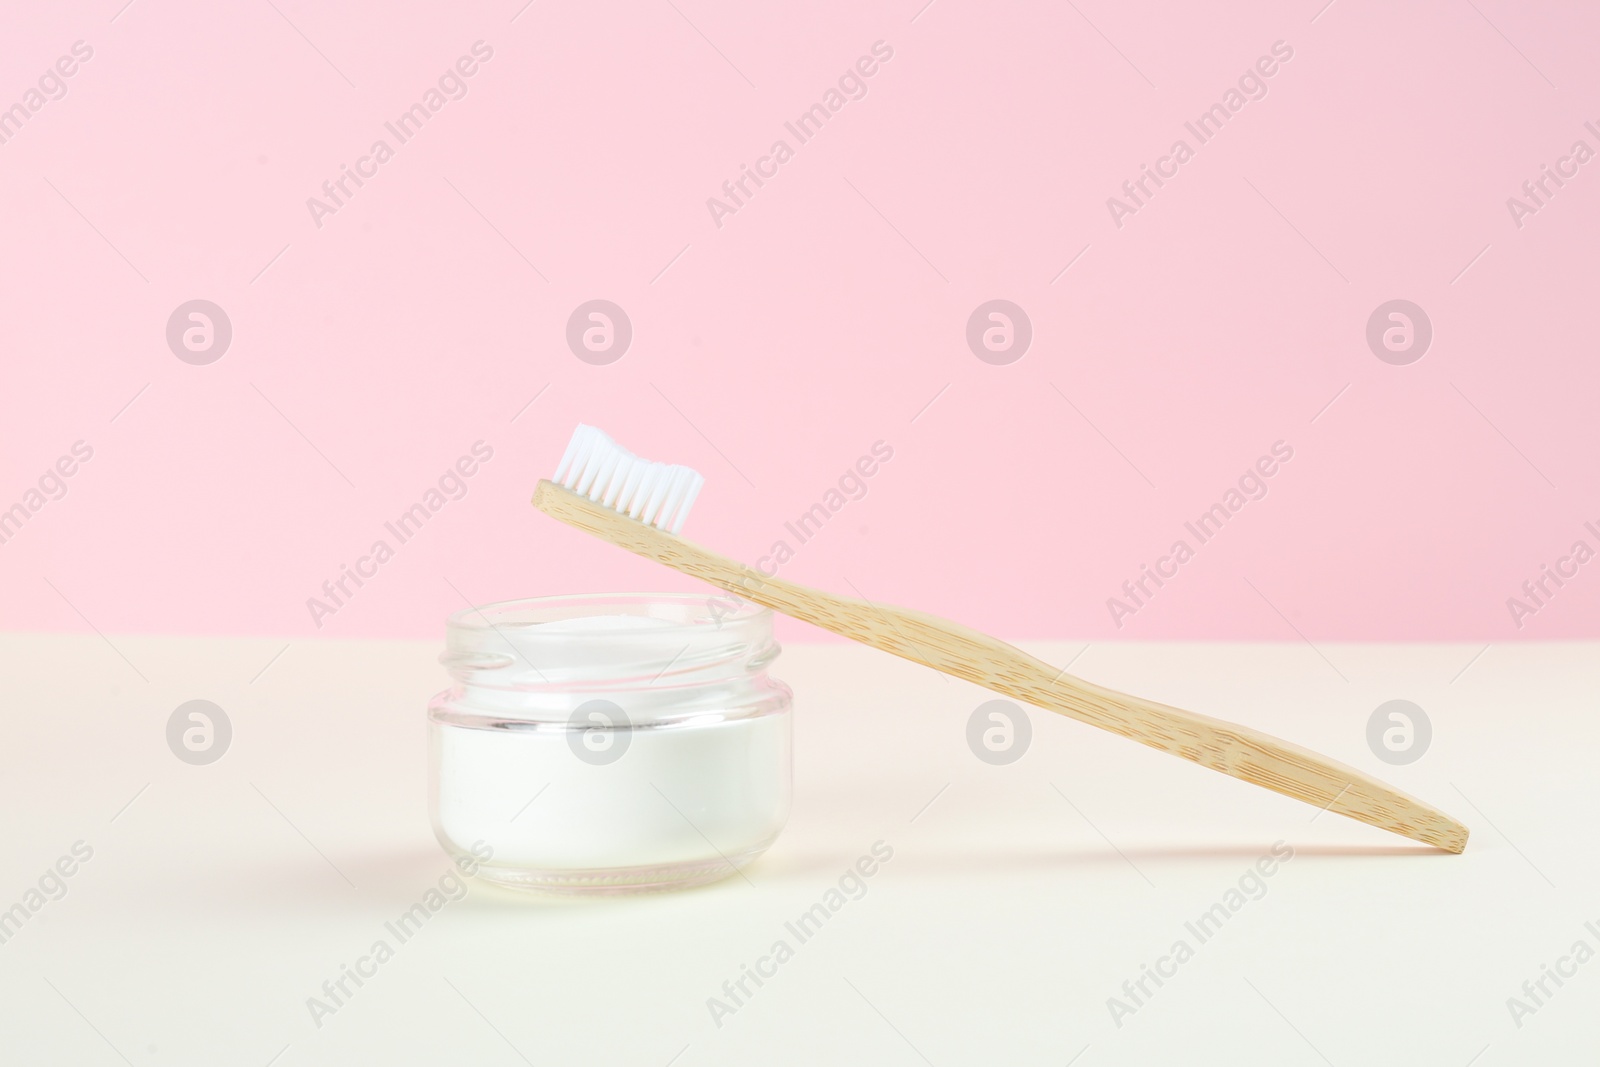 Photo of Bamboo toothbrush and bowl of baking soda on beige table against pink background